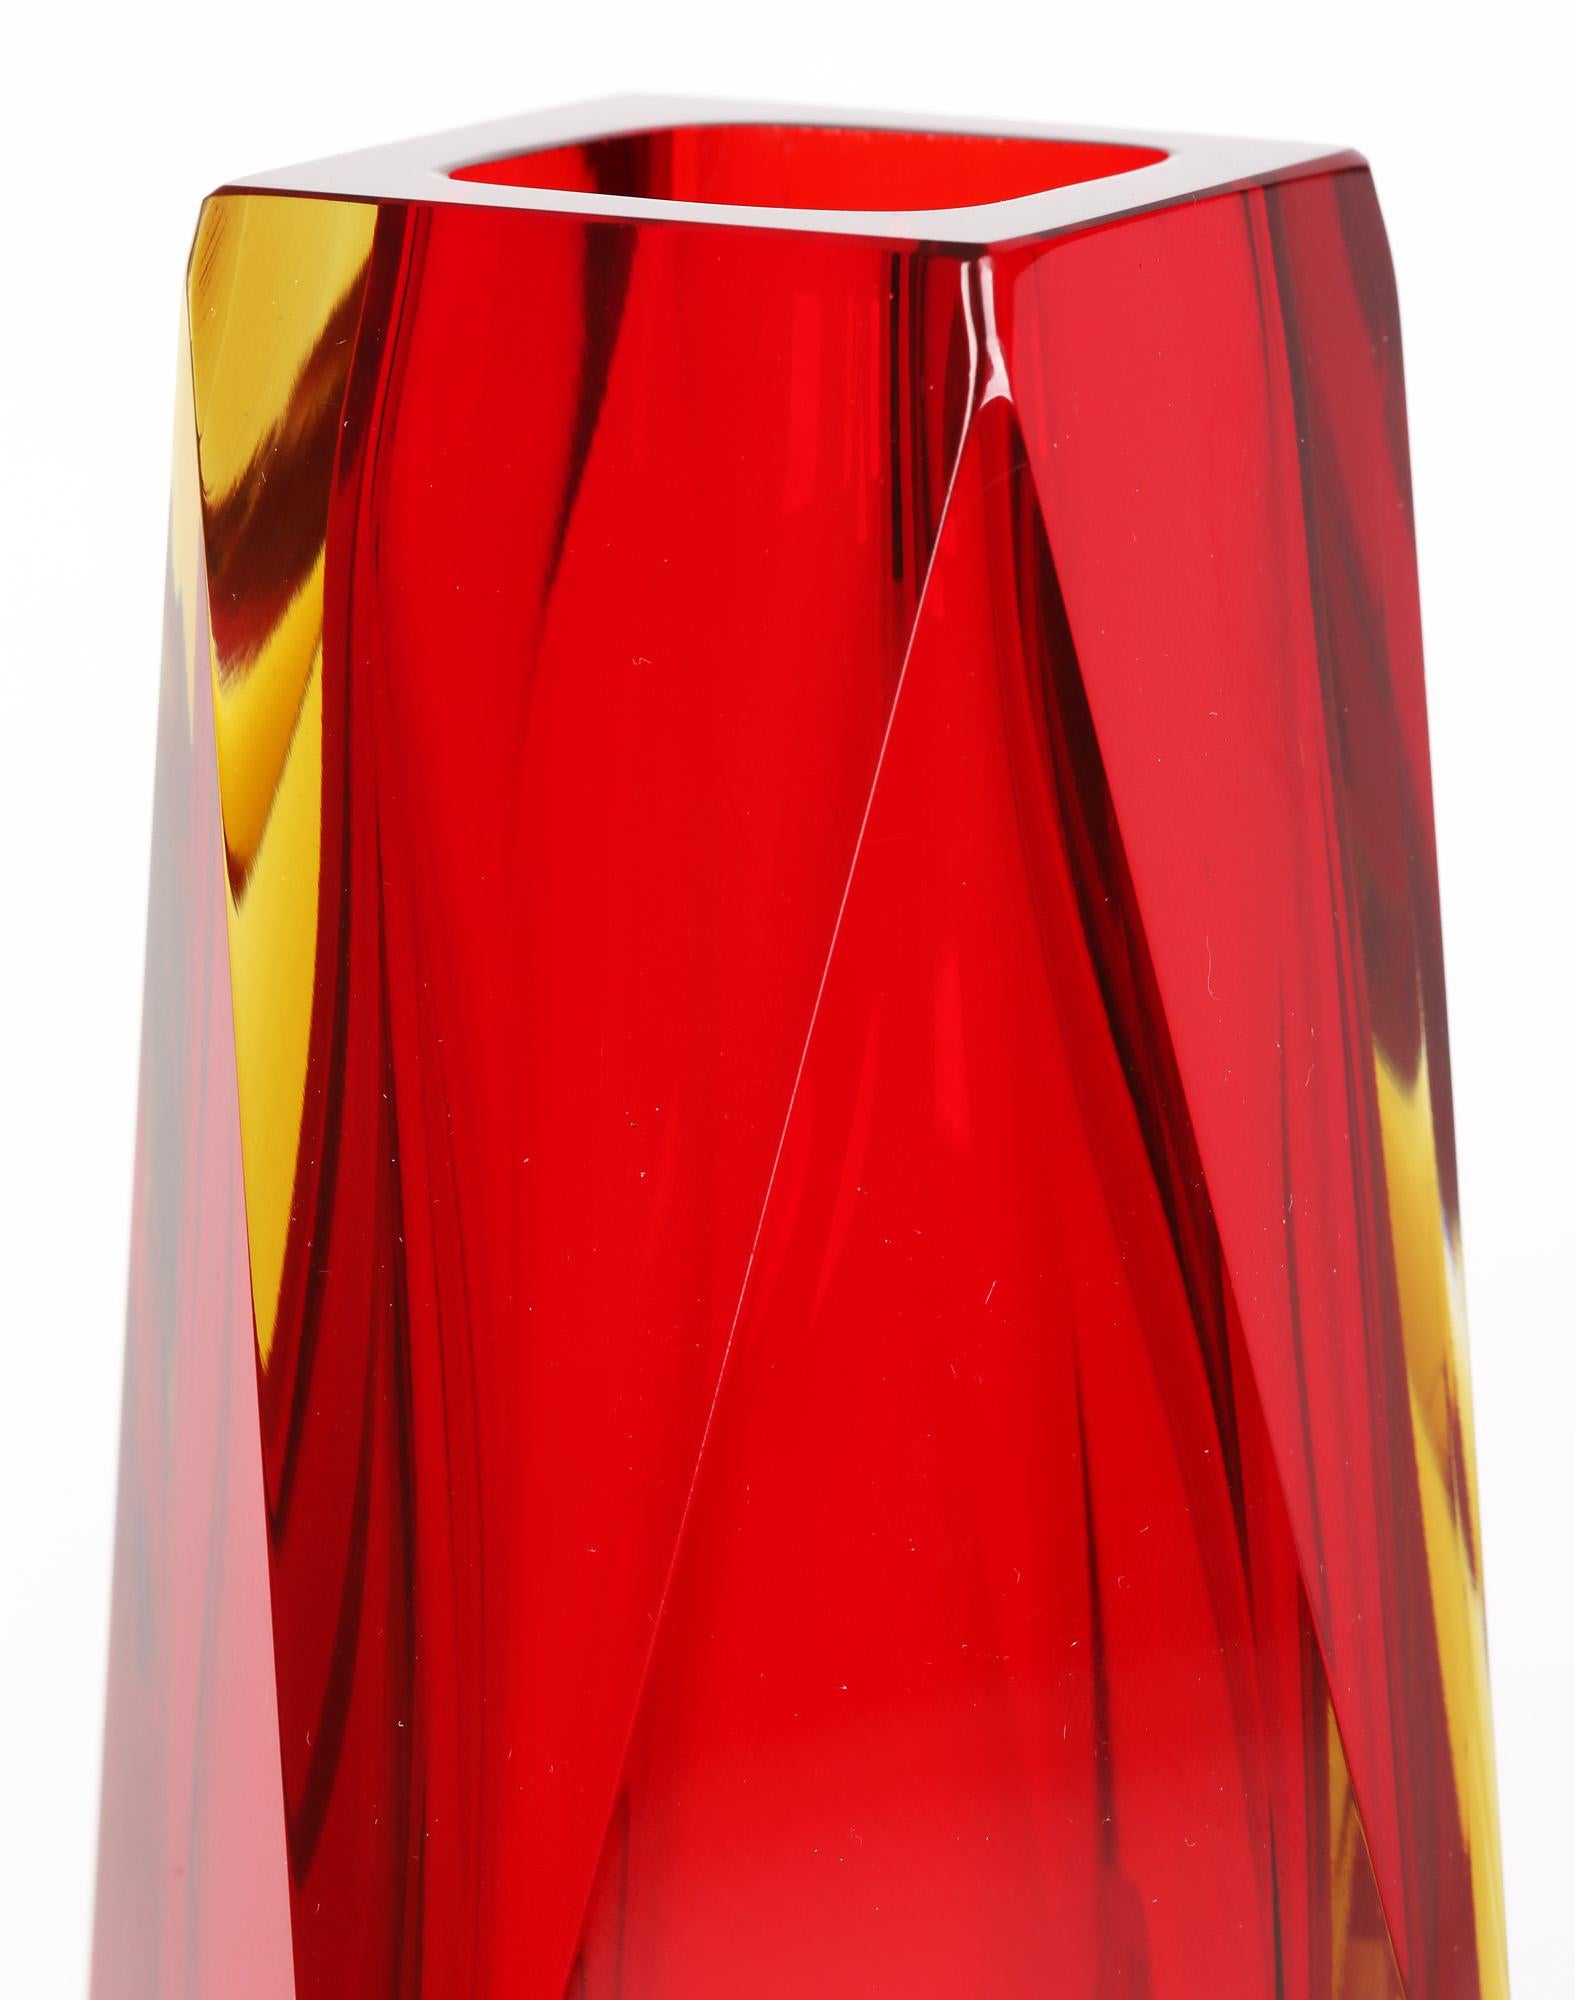 Pagnin & Bon Italian Murano Red and Yellow Sommerso Facet Cut Glass Vase For Sale 5